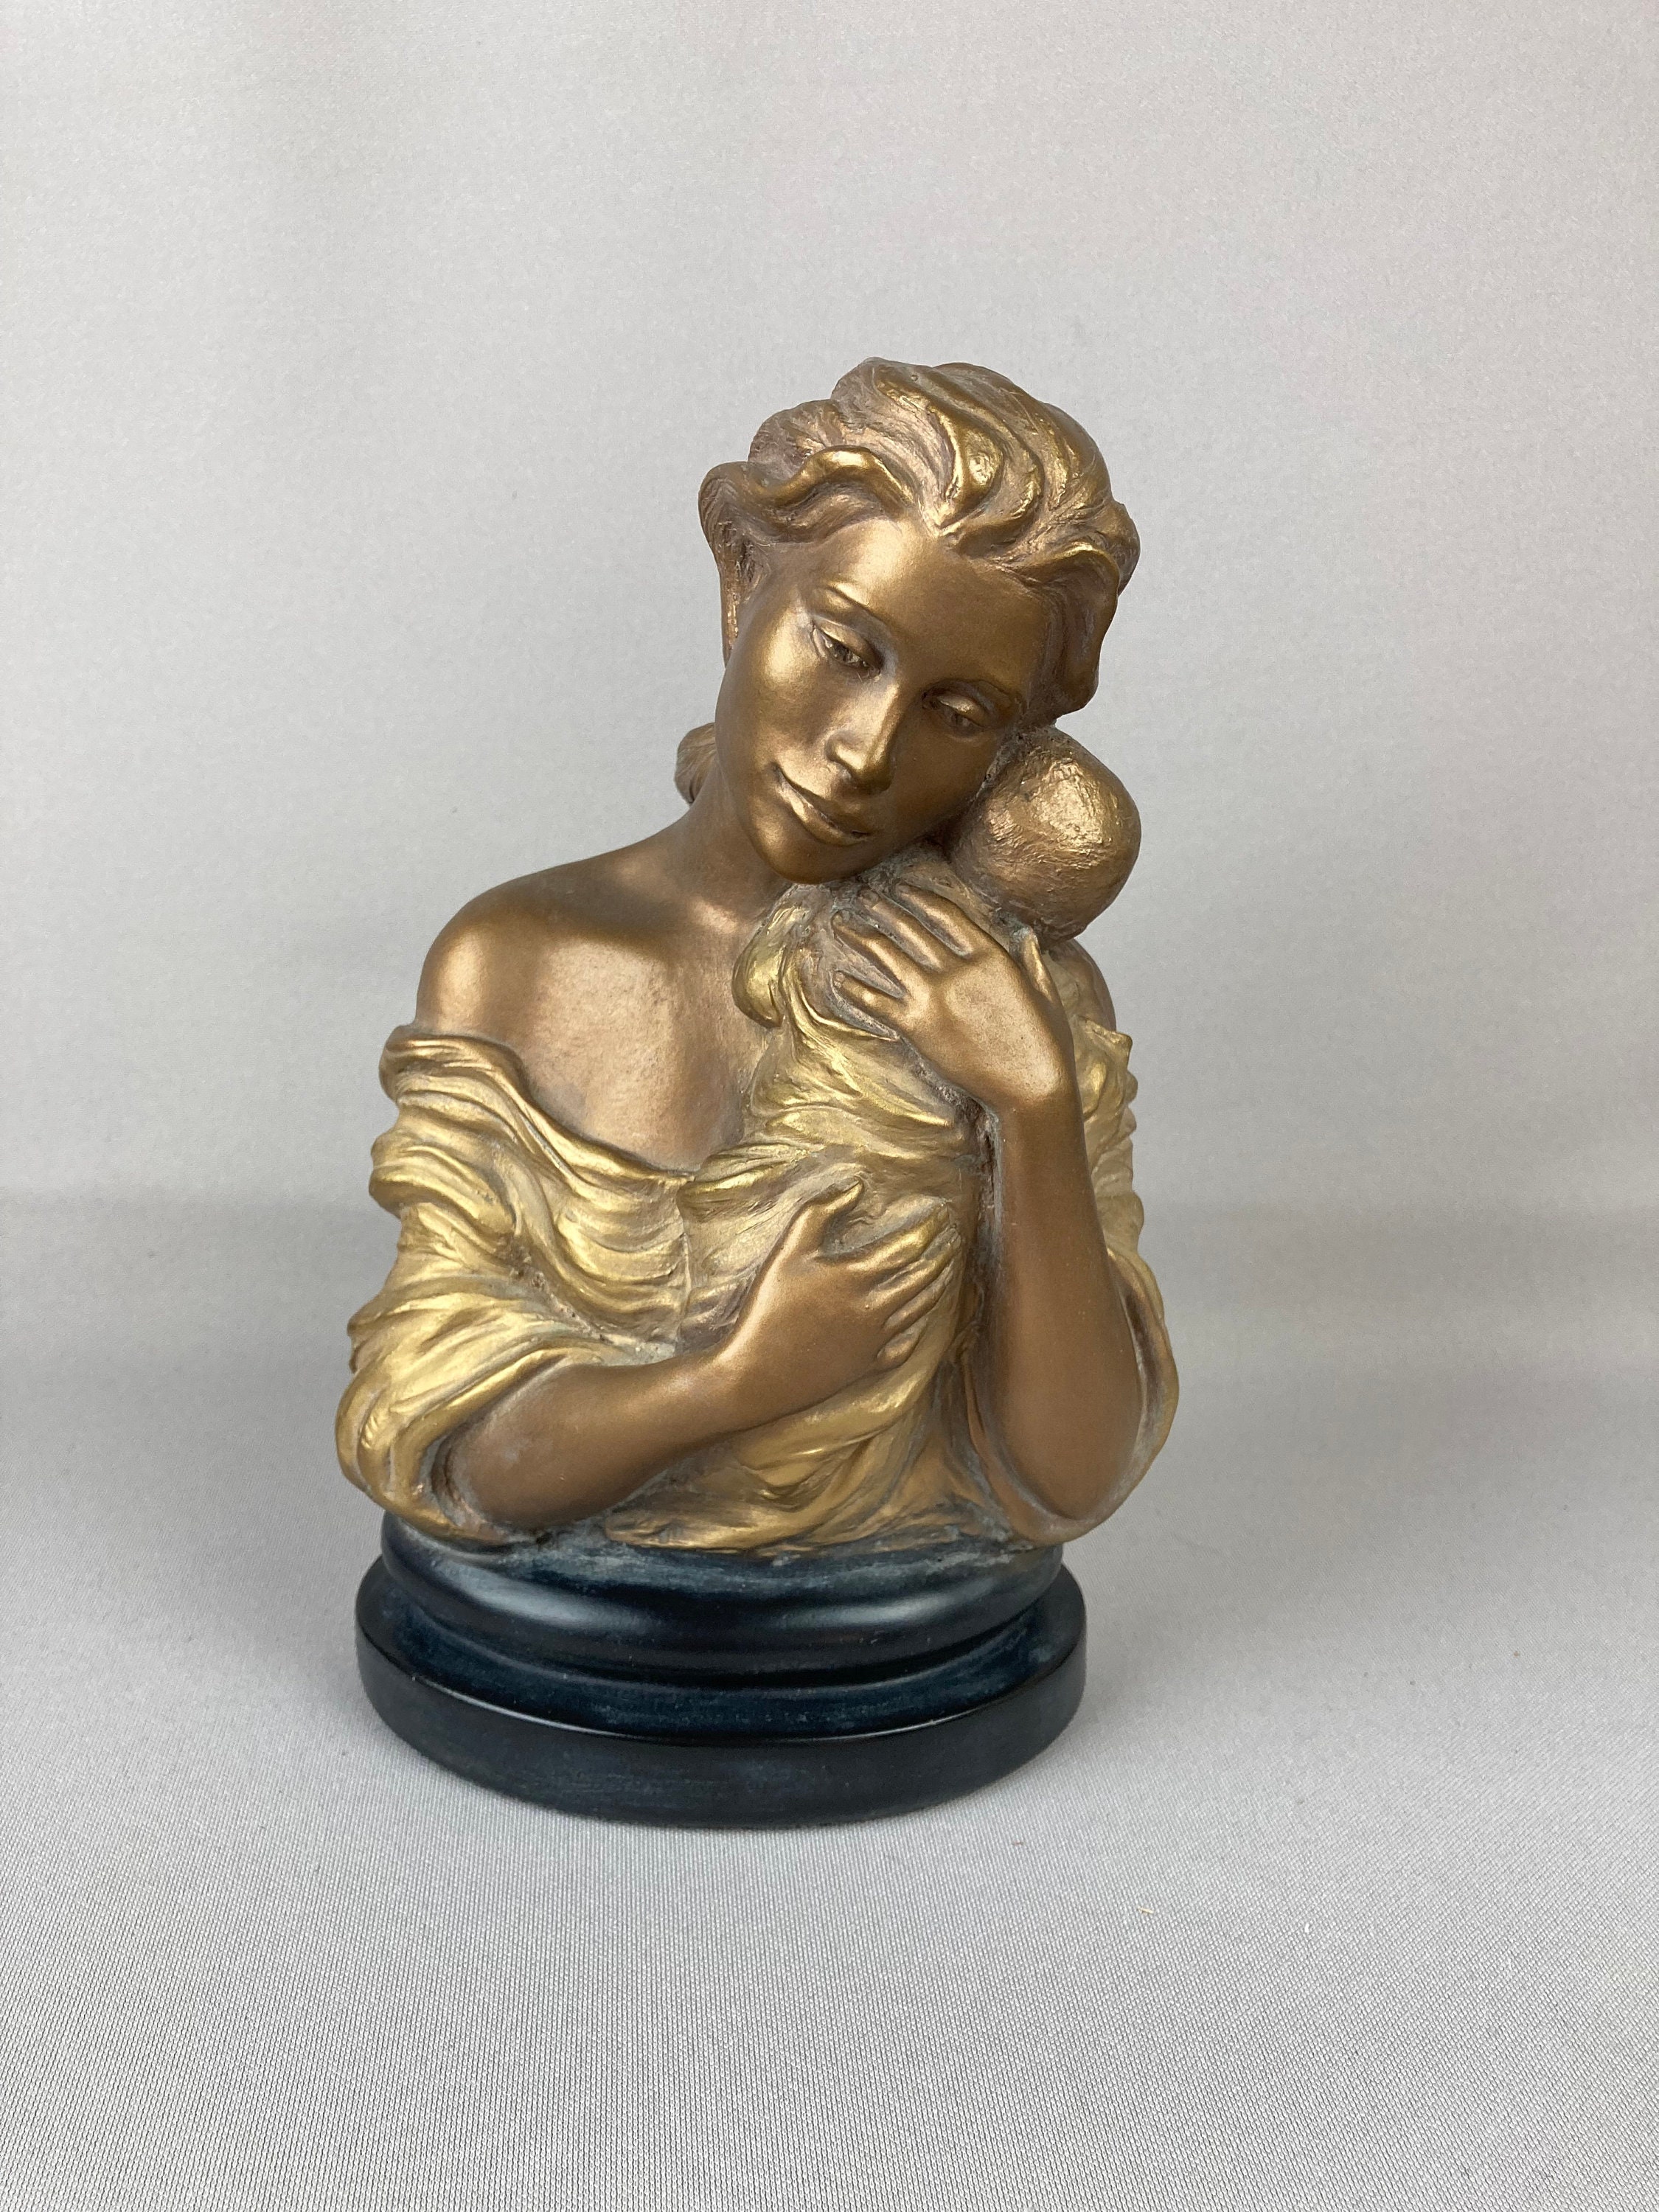 Vintage Signed J. B. 1890 Bronzed Resin Bust of Boy in Newsboy Cap 5-3/4”  Tall 